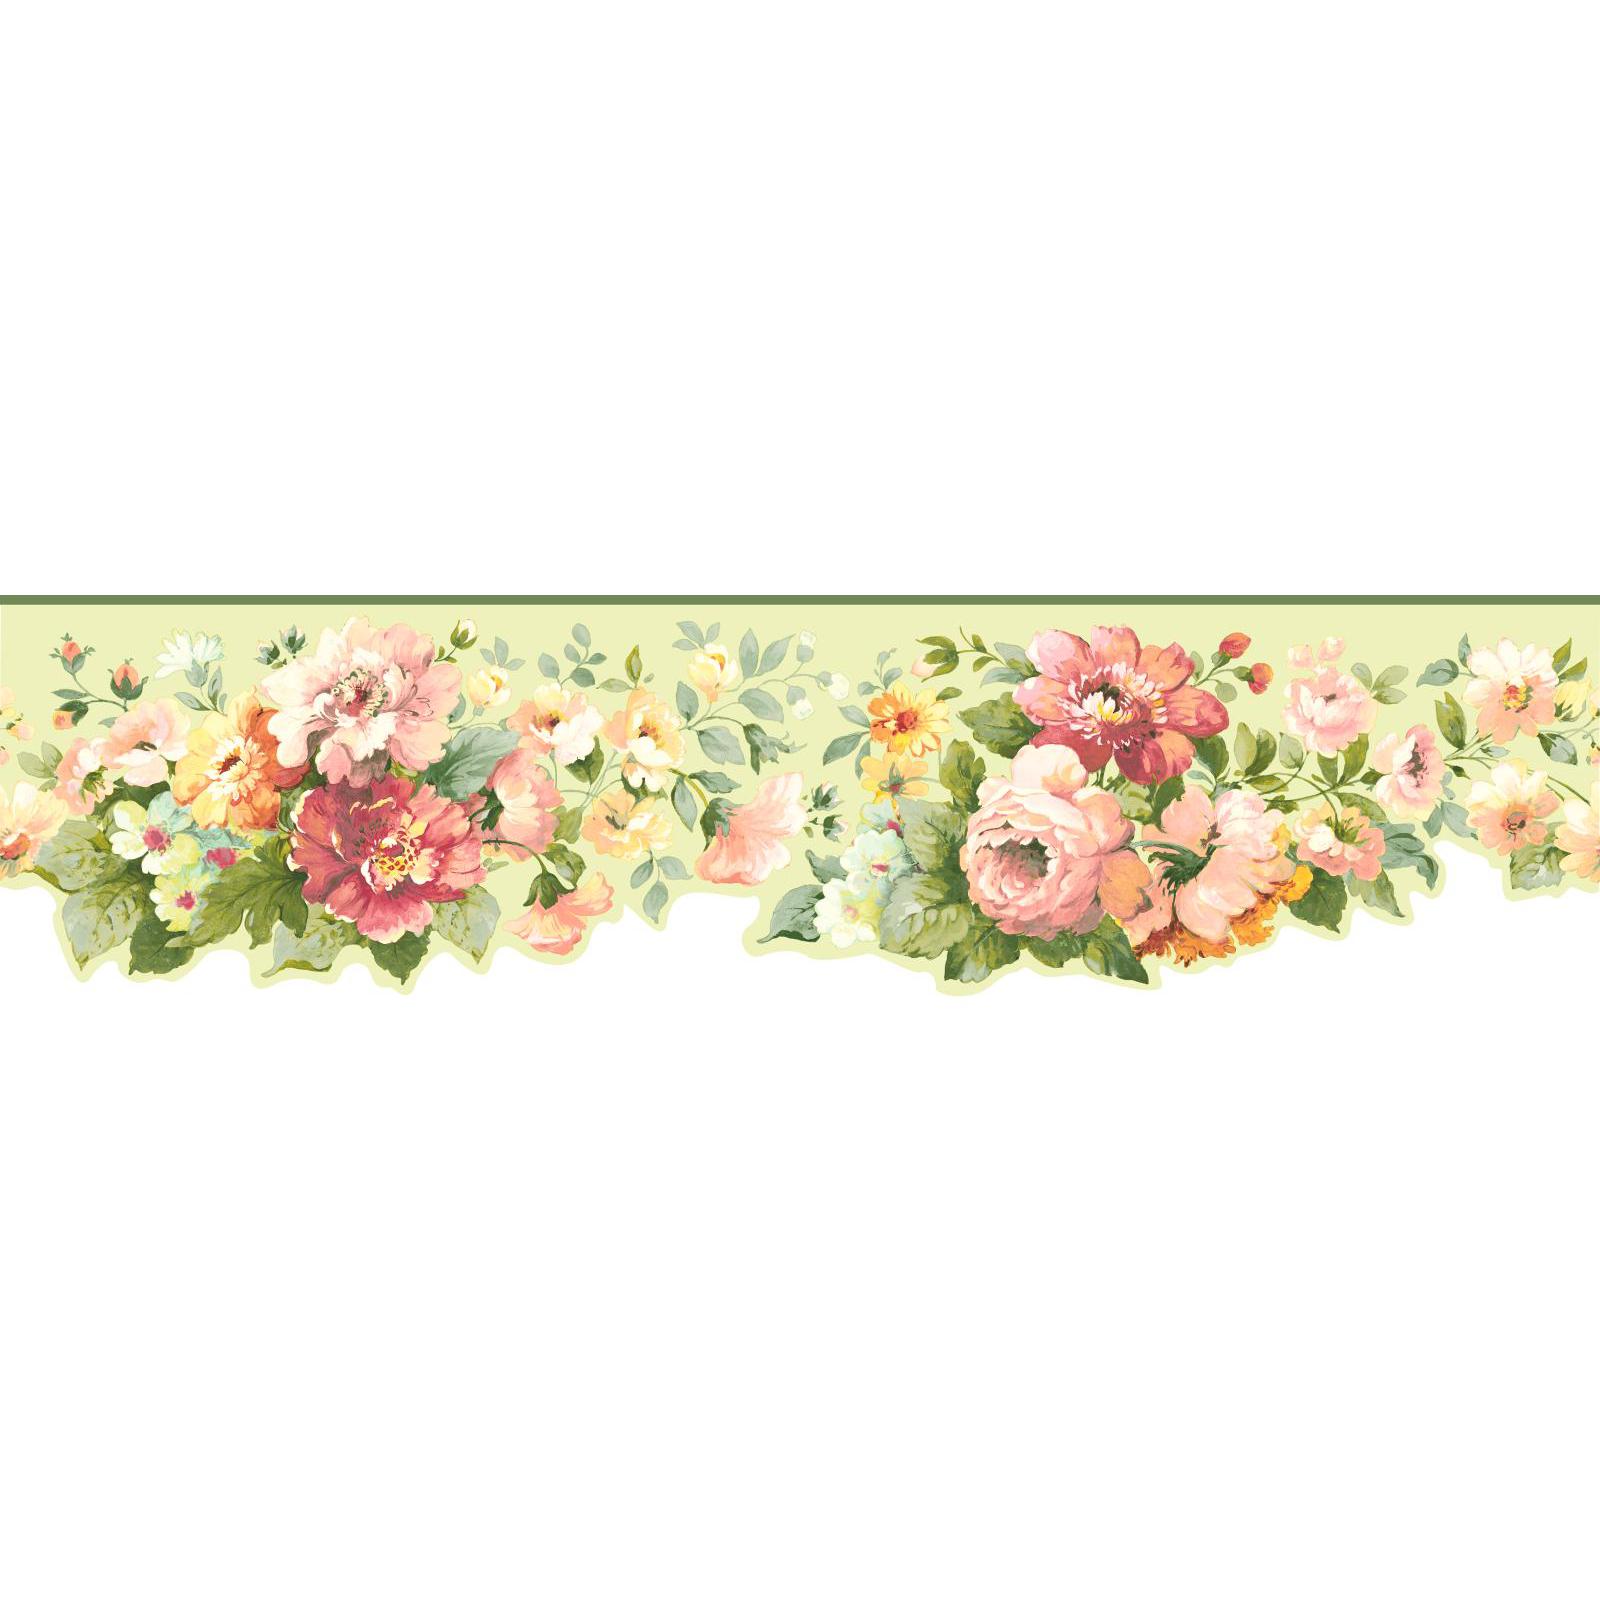 York Wallcoverings Border  Document Floral Border in Mint Green, Dark Green, Blue-Green, Peach, Pink, Rose, Yellows